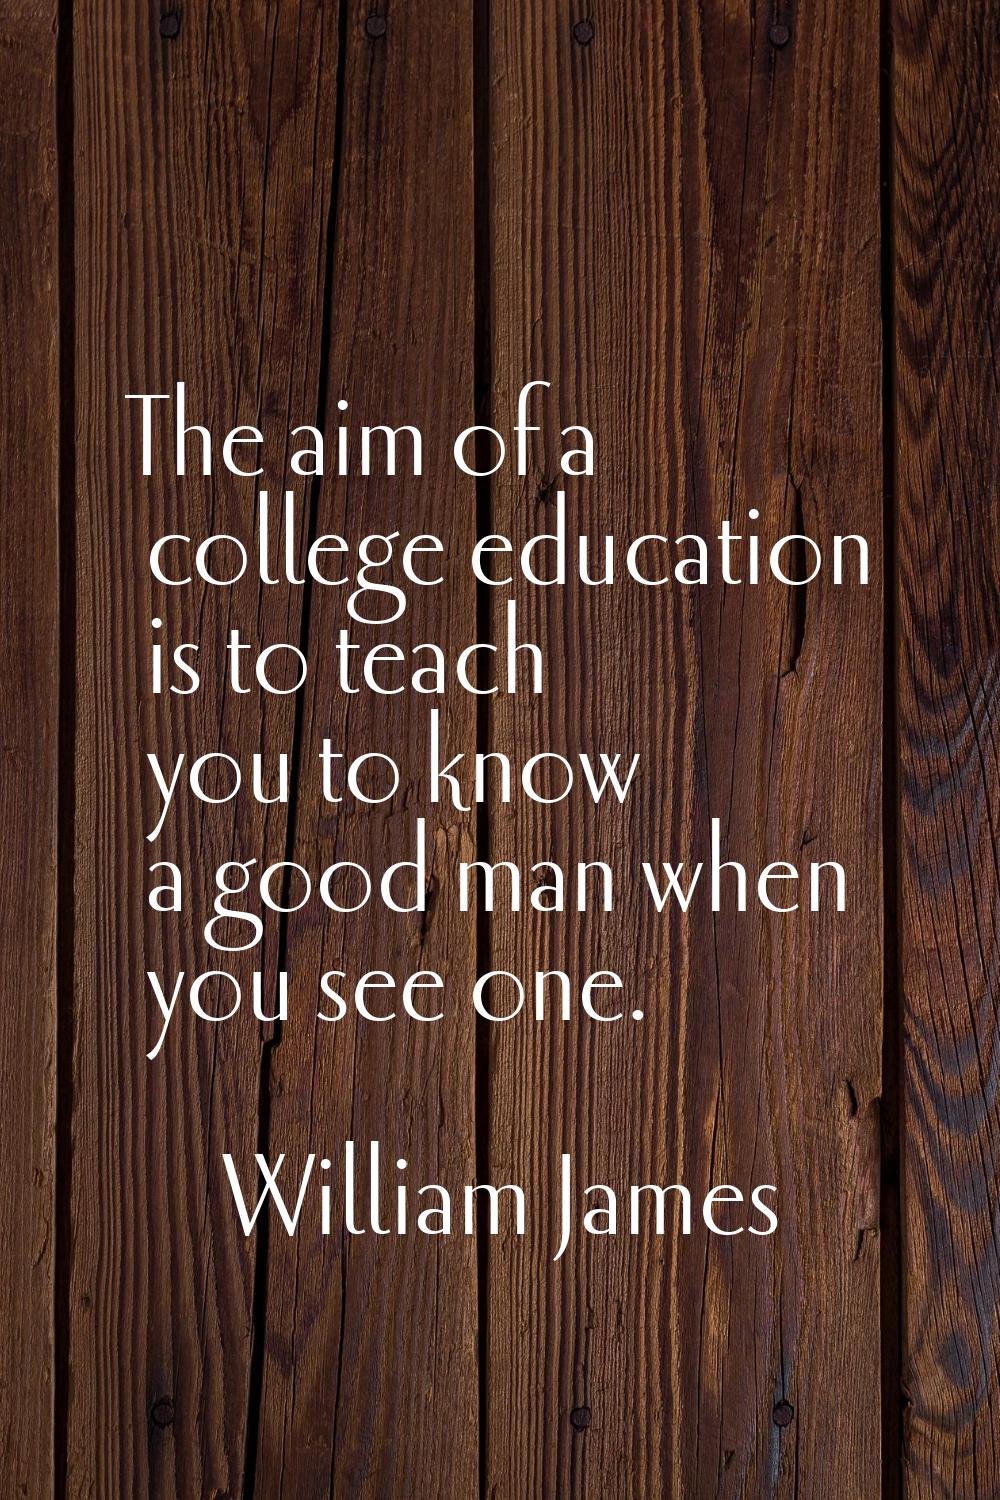 The aim of a college education is to teach you to know a good man when you see one.